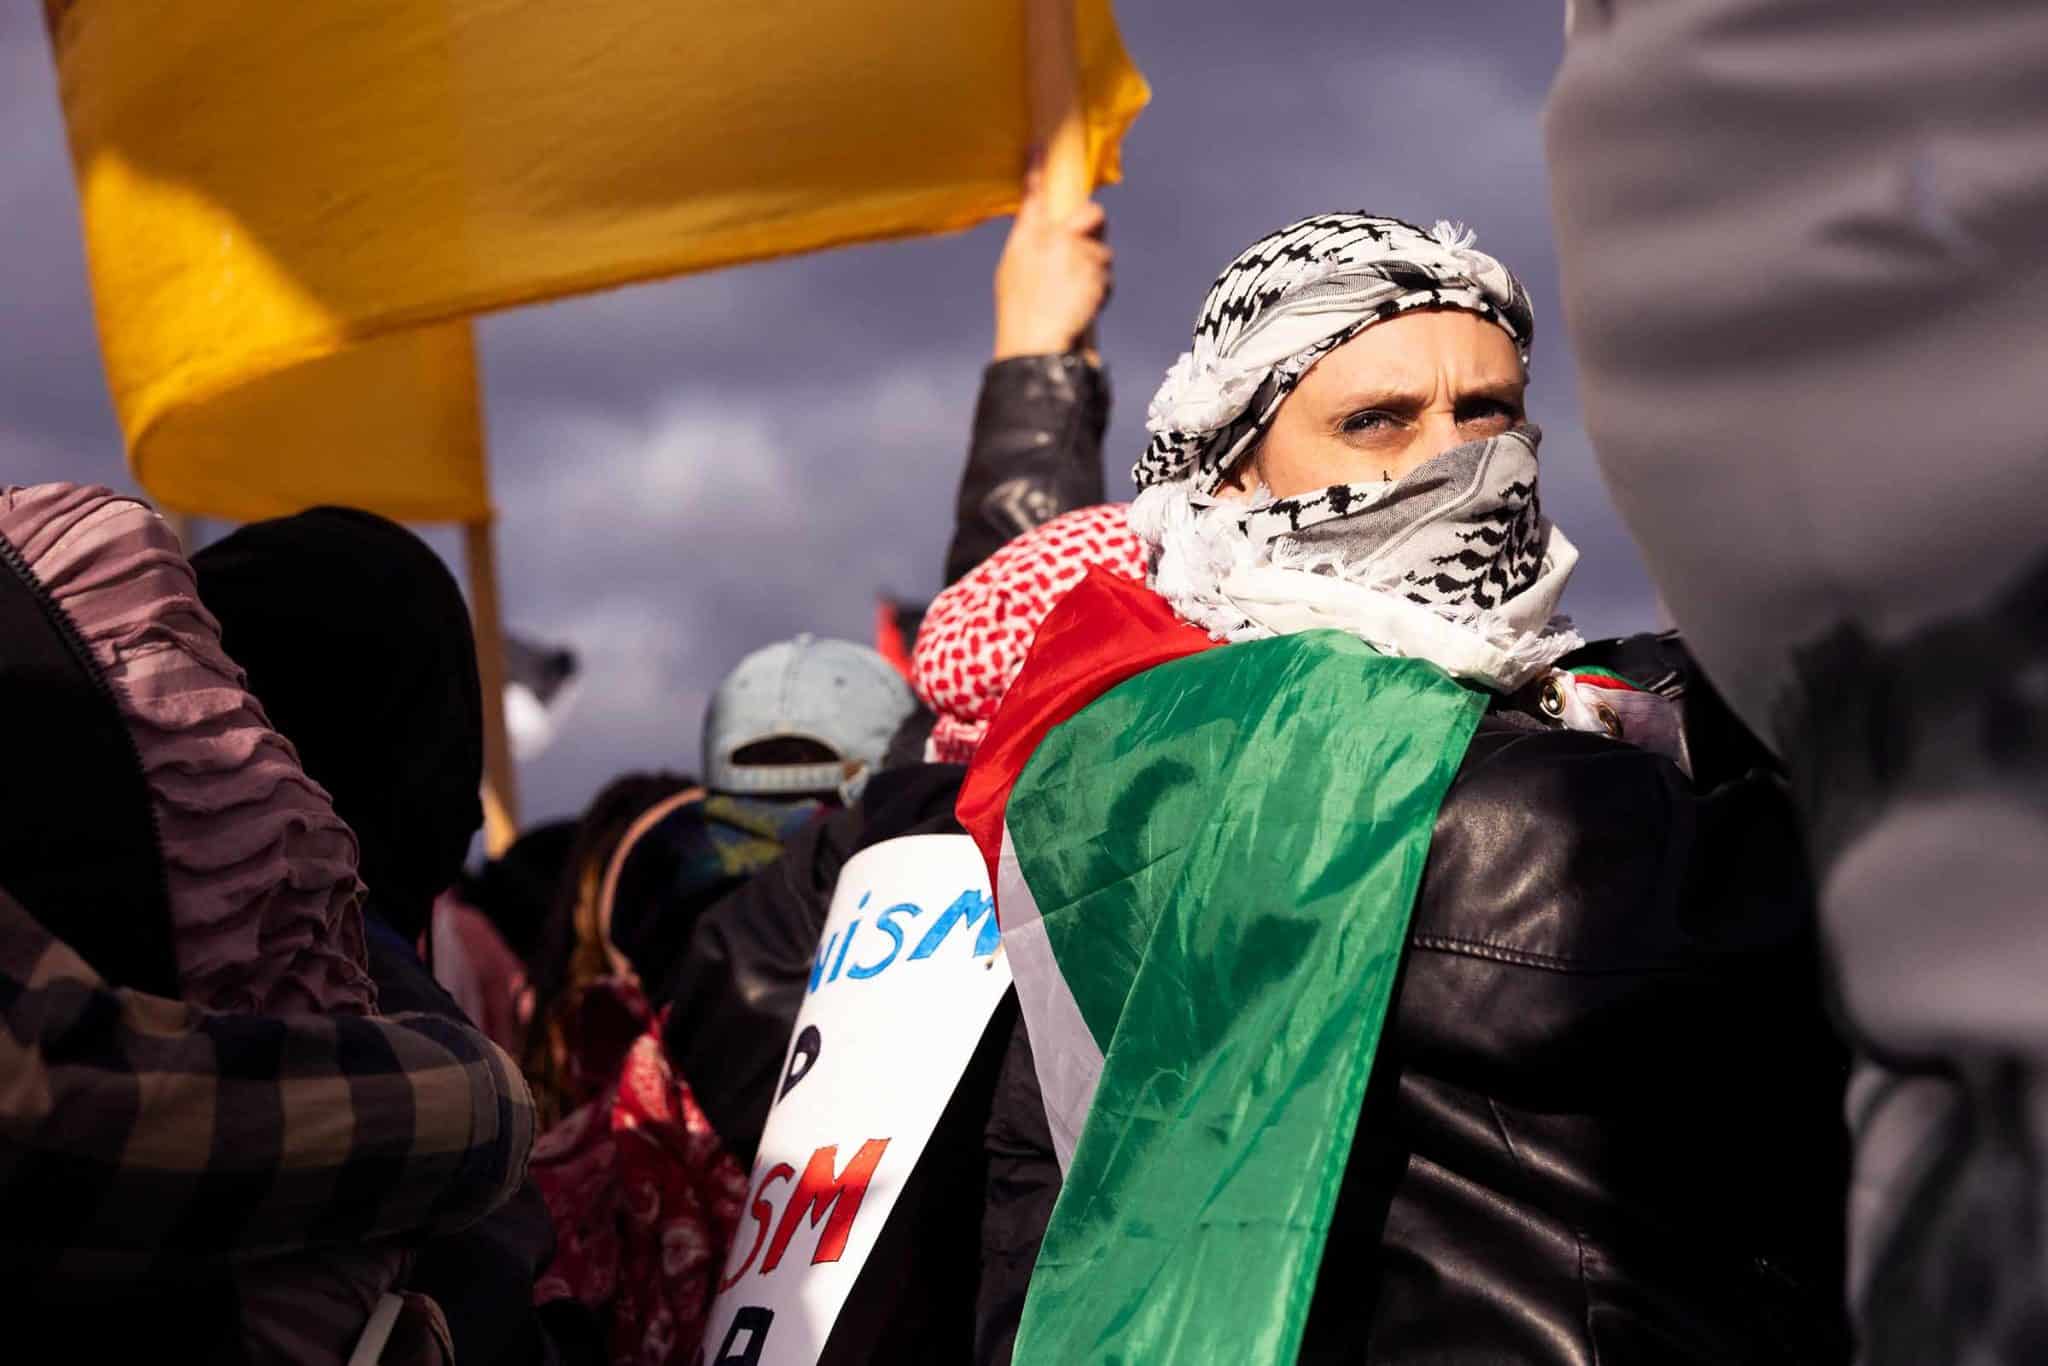 A person draped in the Palestinian flag and whose face is mostly covered with a kuffiyeh stares out into the sun during an outdoor protest